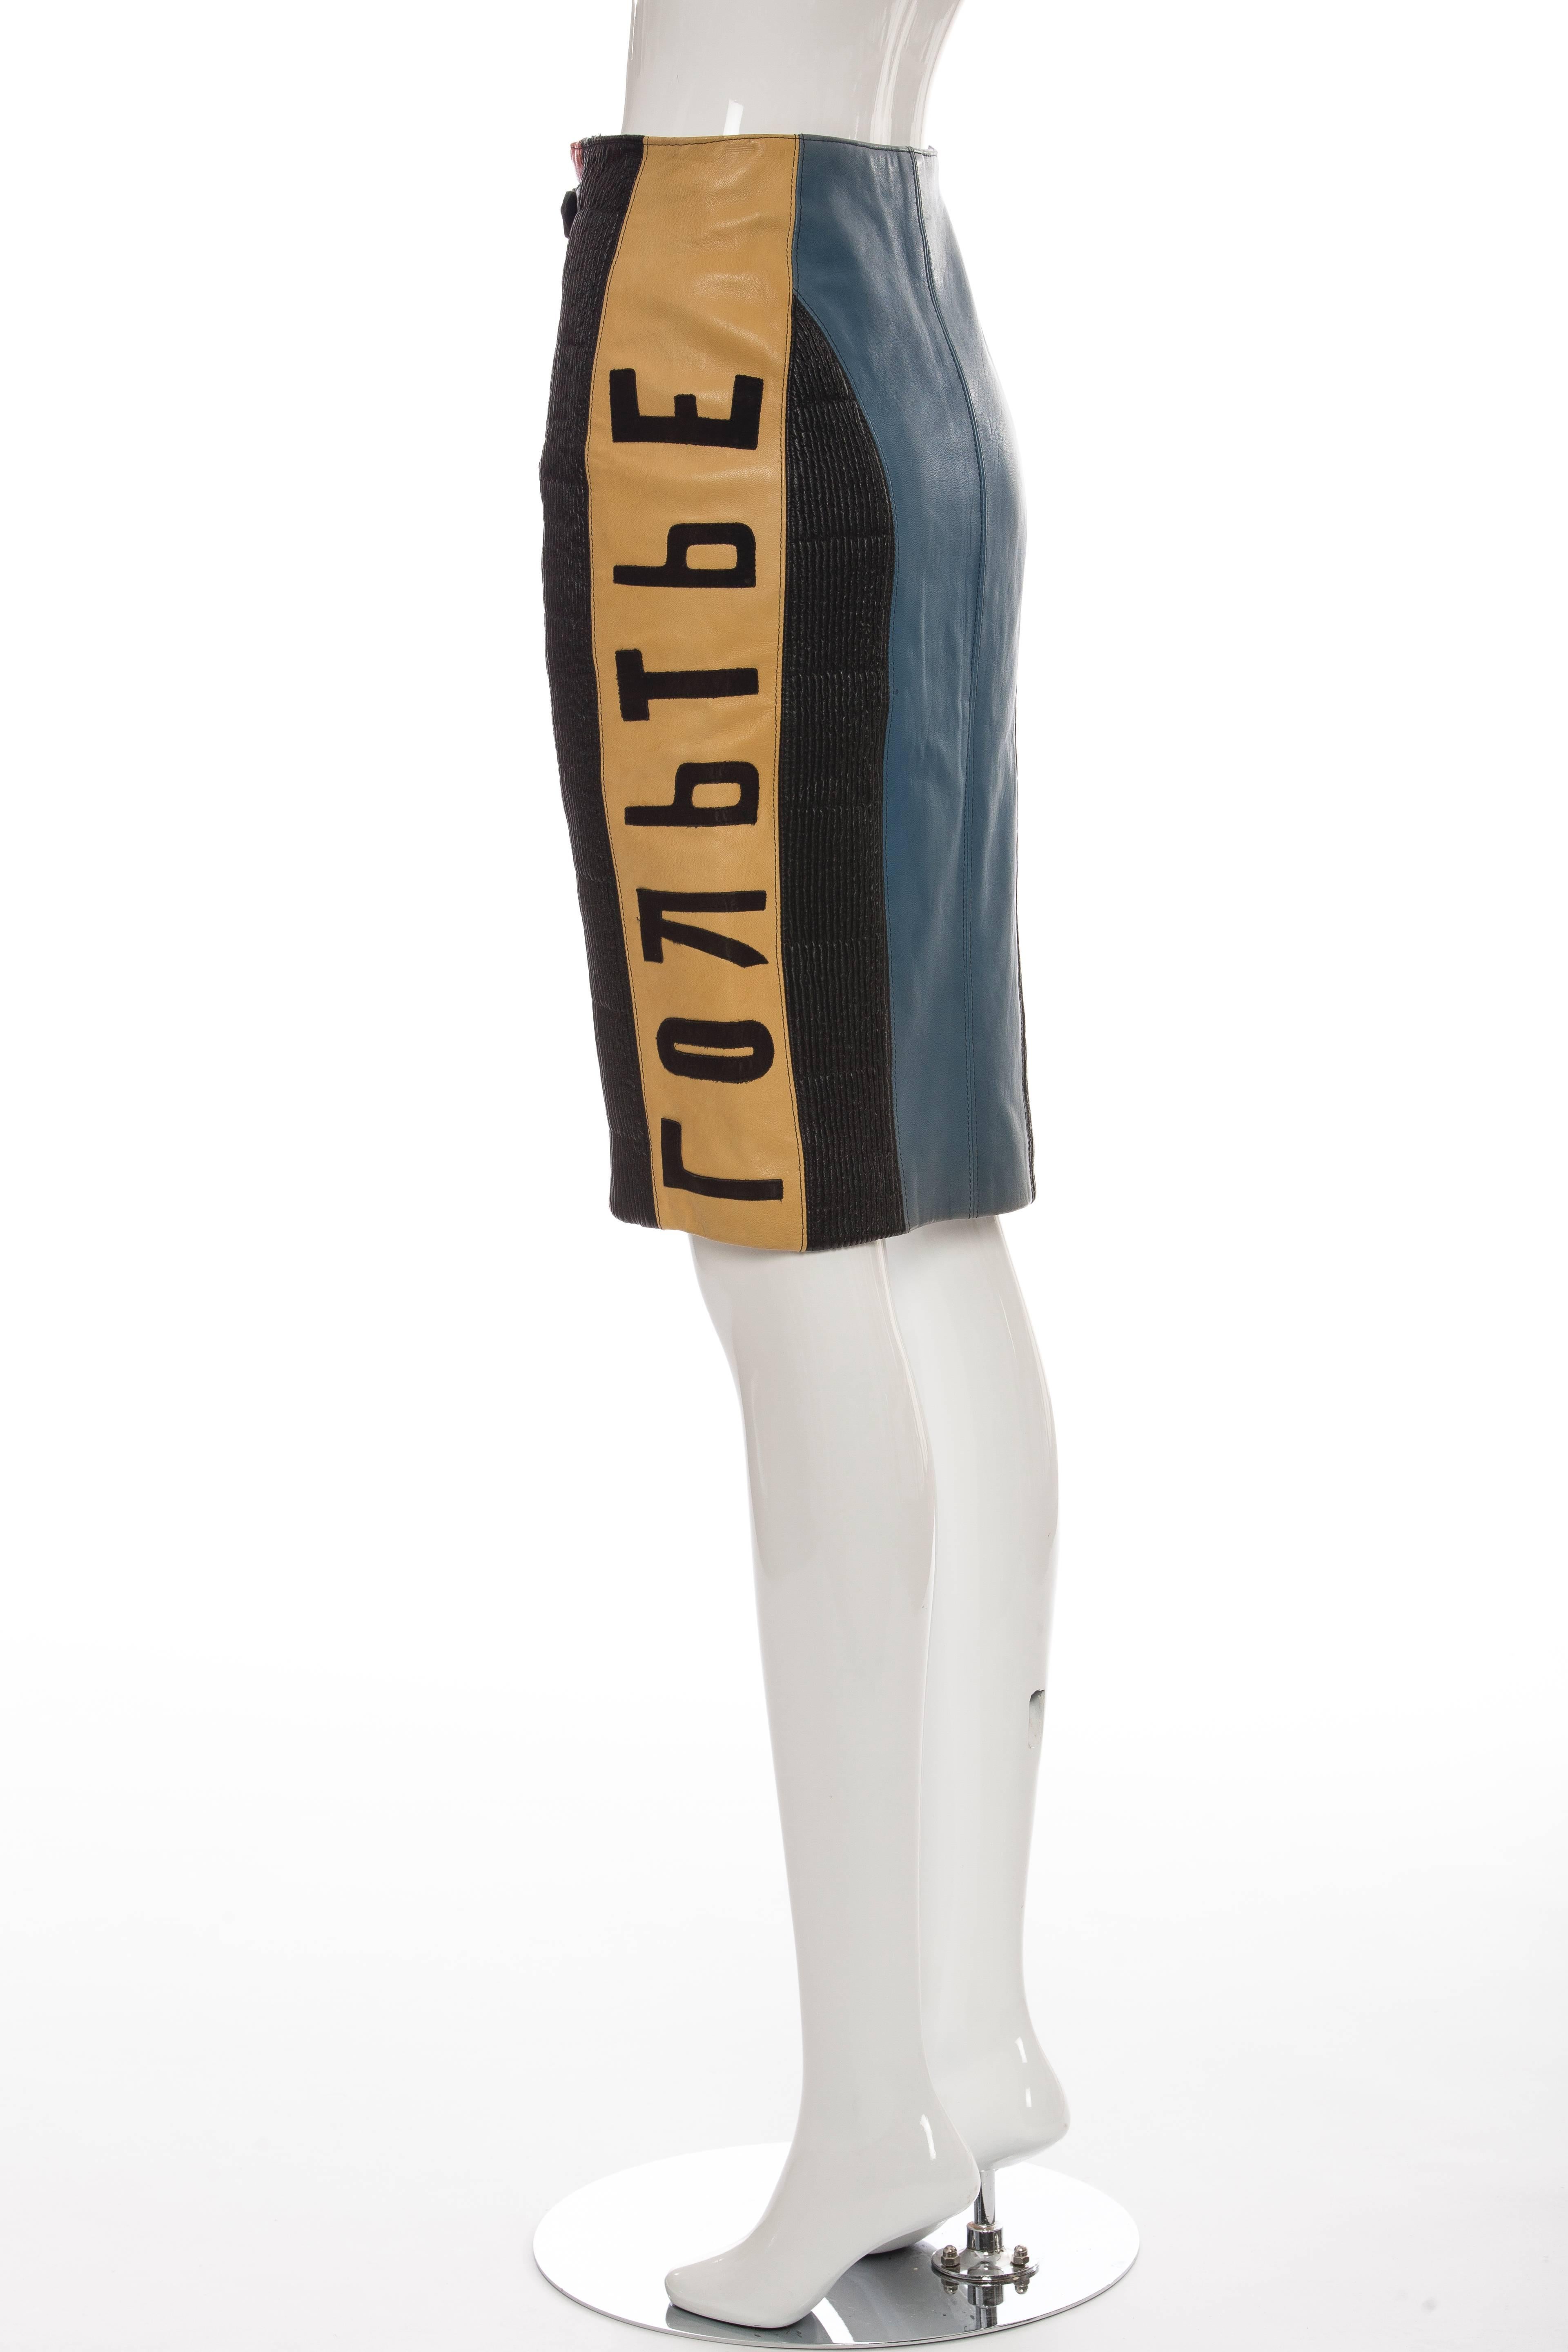 Jean Paul Gaultier 'Russian Constructivist' Leather Skirt, Autumn - Winter 1986 In Excellent Condition For Sale In Cincinnati, OH